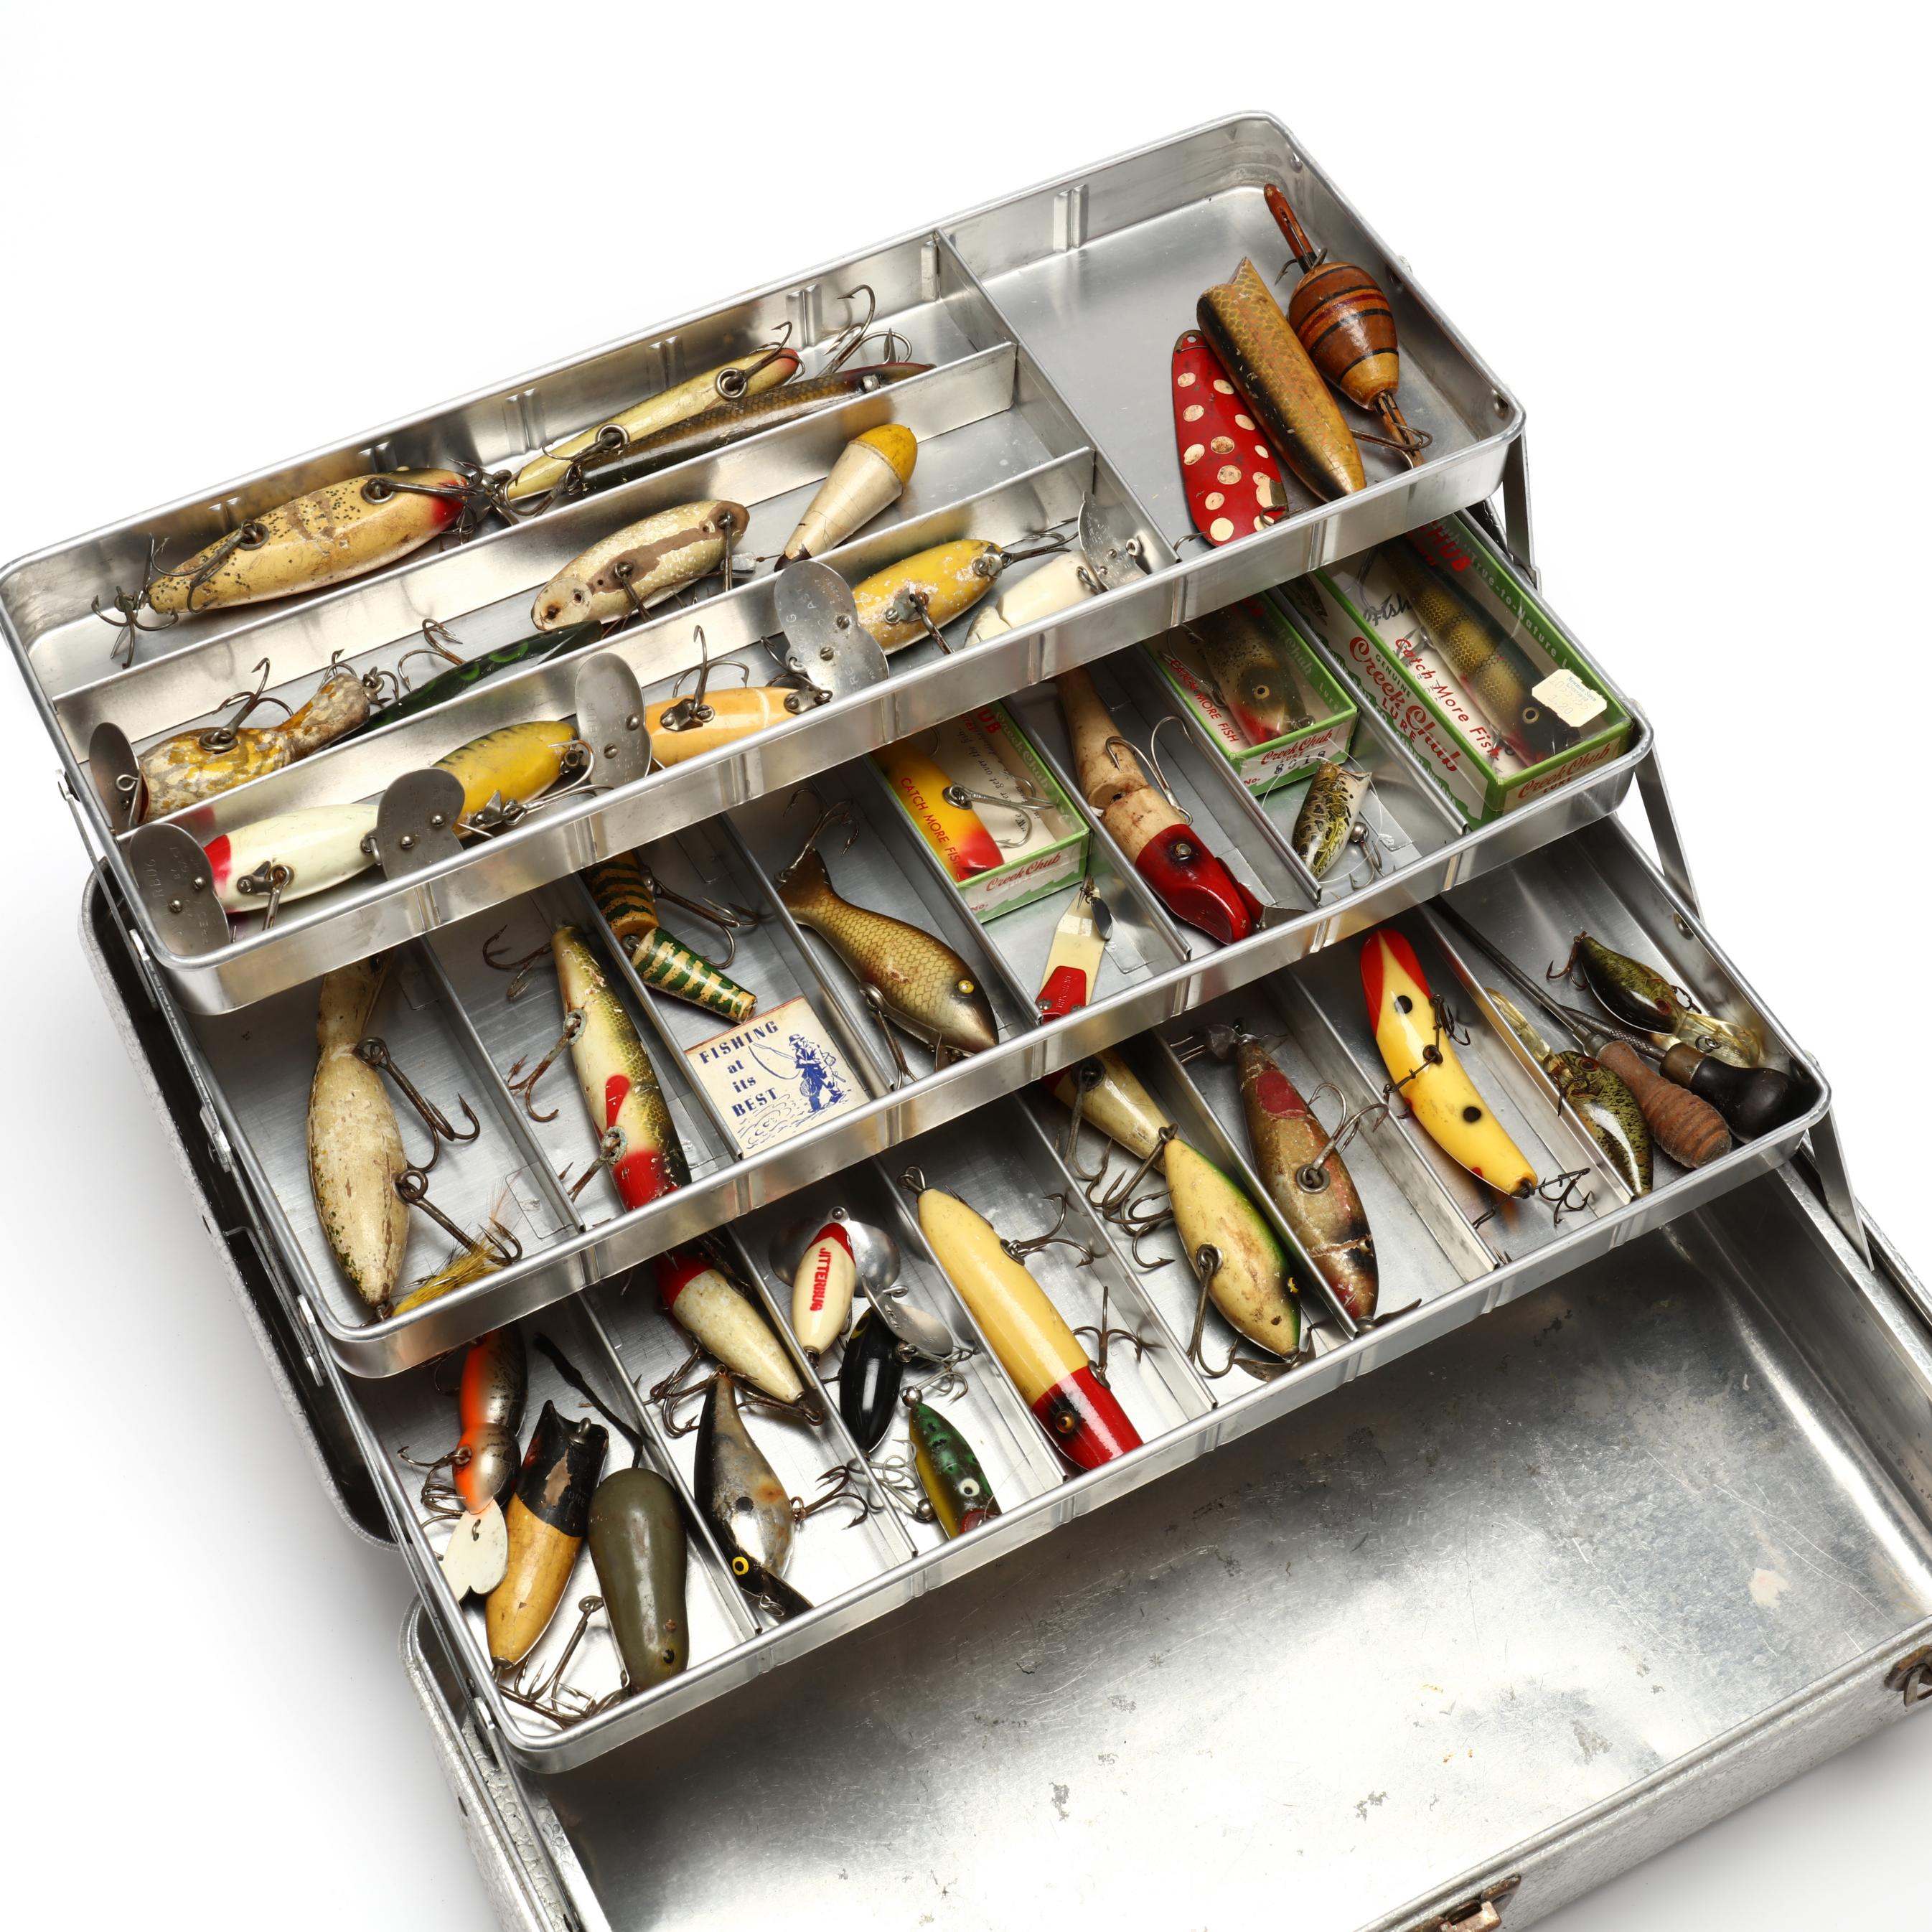 Early Tackle Box full of Vintage Fishing Lures (Lot 3262 - Fall Sporting  Art AuctionOct 20, 2022, 10:00am)